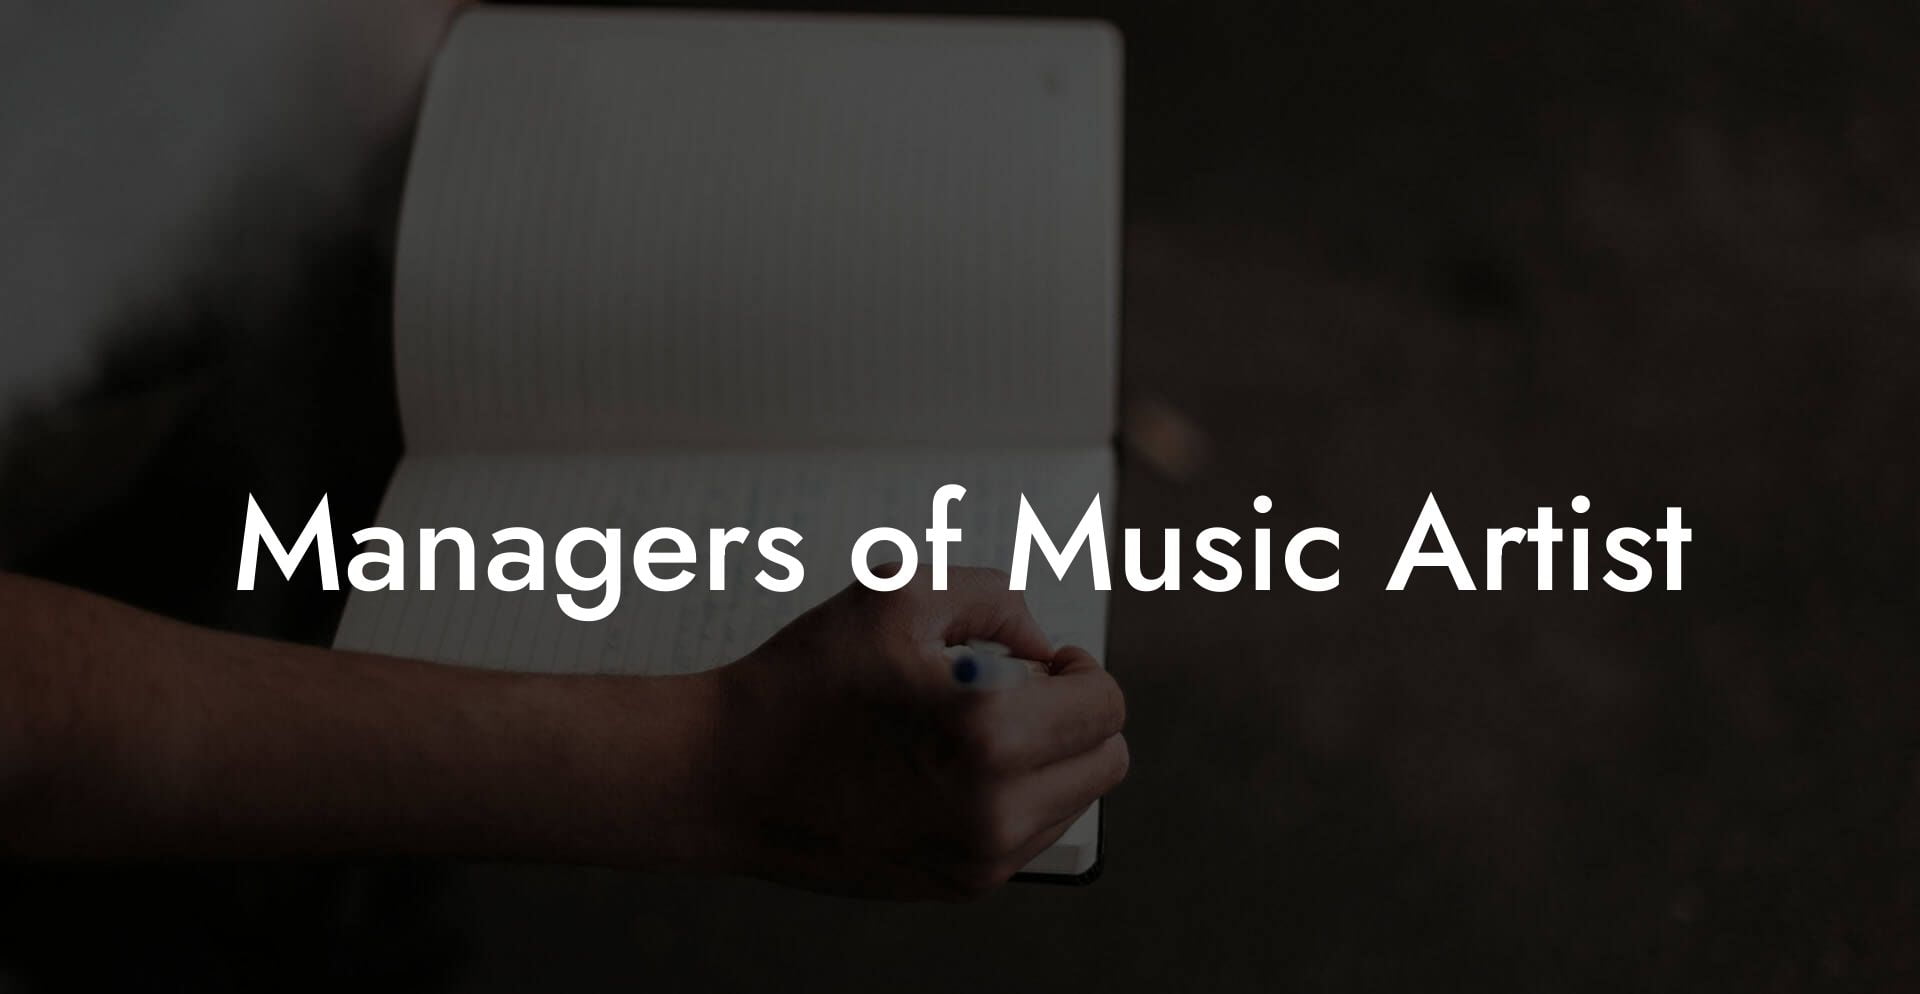 Managers of Music Artist